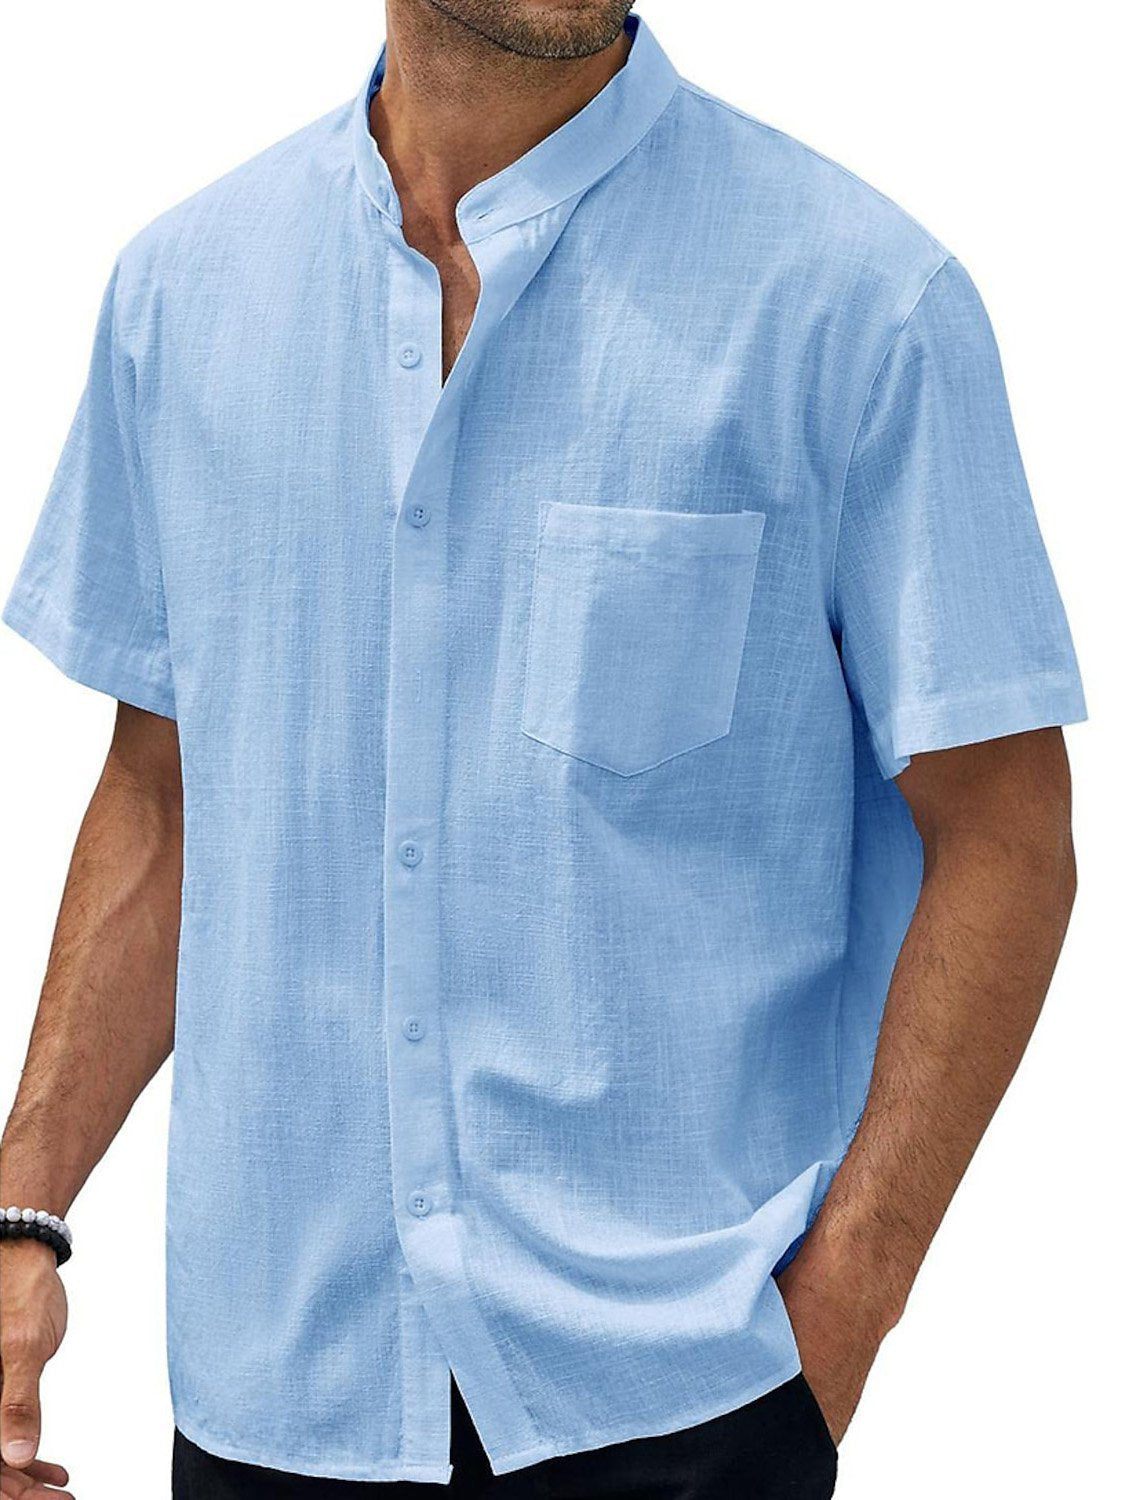 Men's Solid Color Stand Collar Pocket Cotton Linen Casual Short Sleeve Shirt